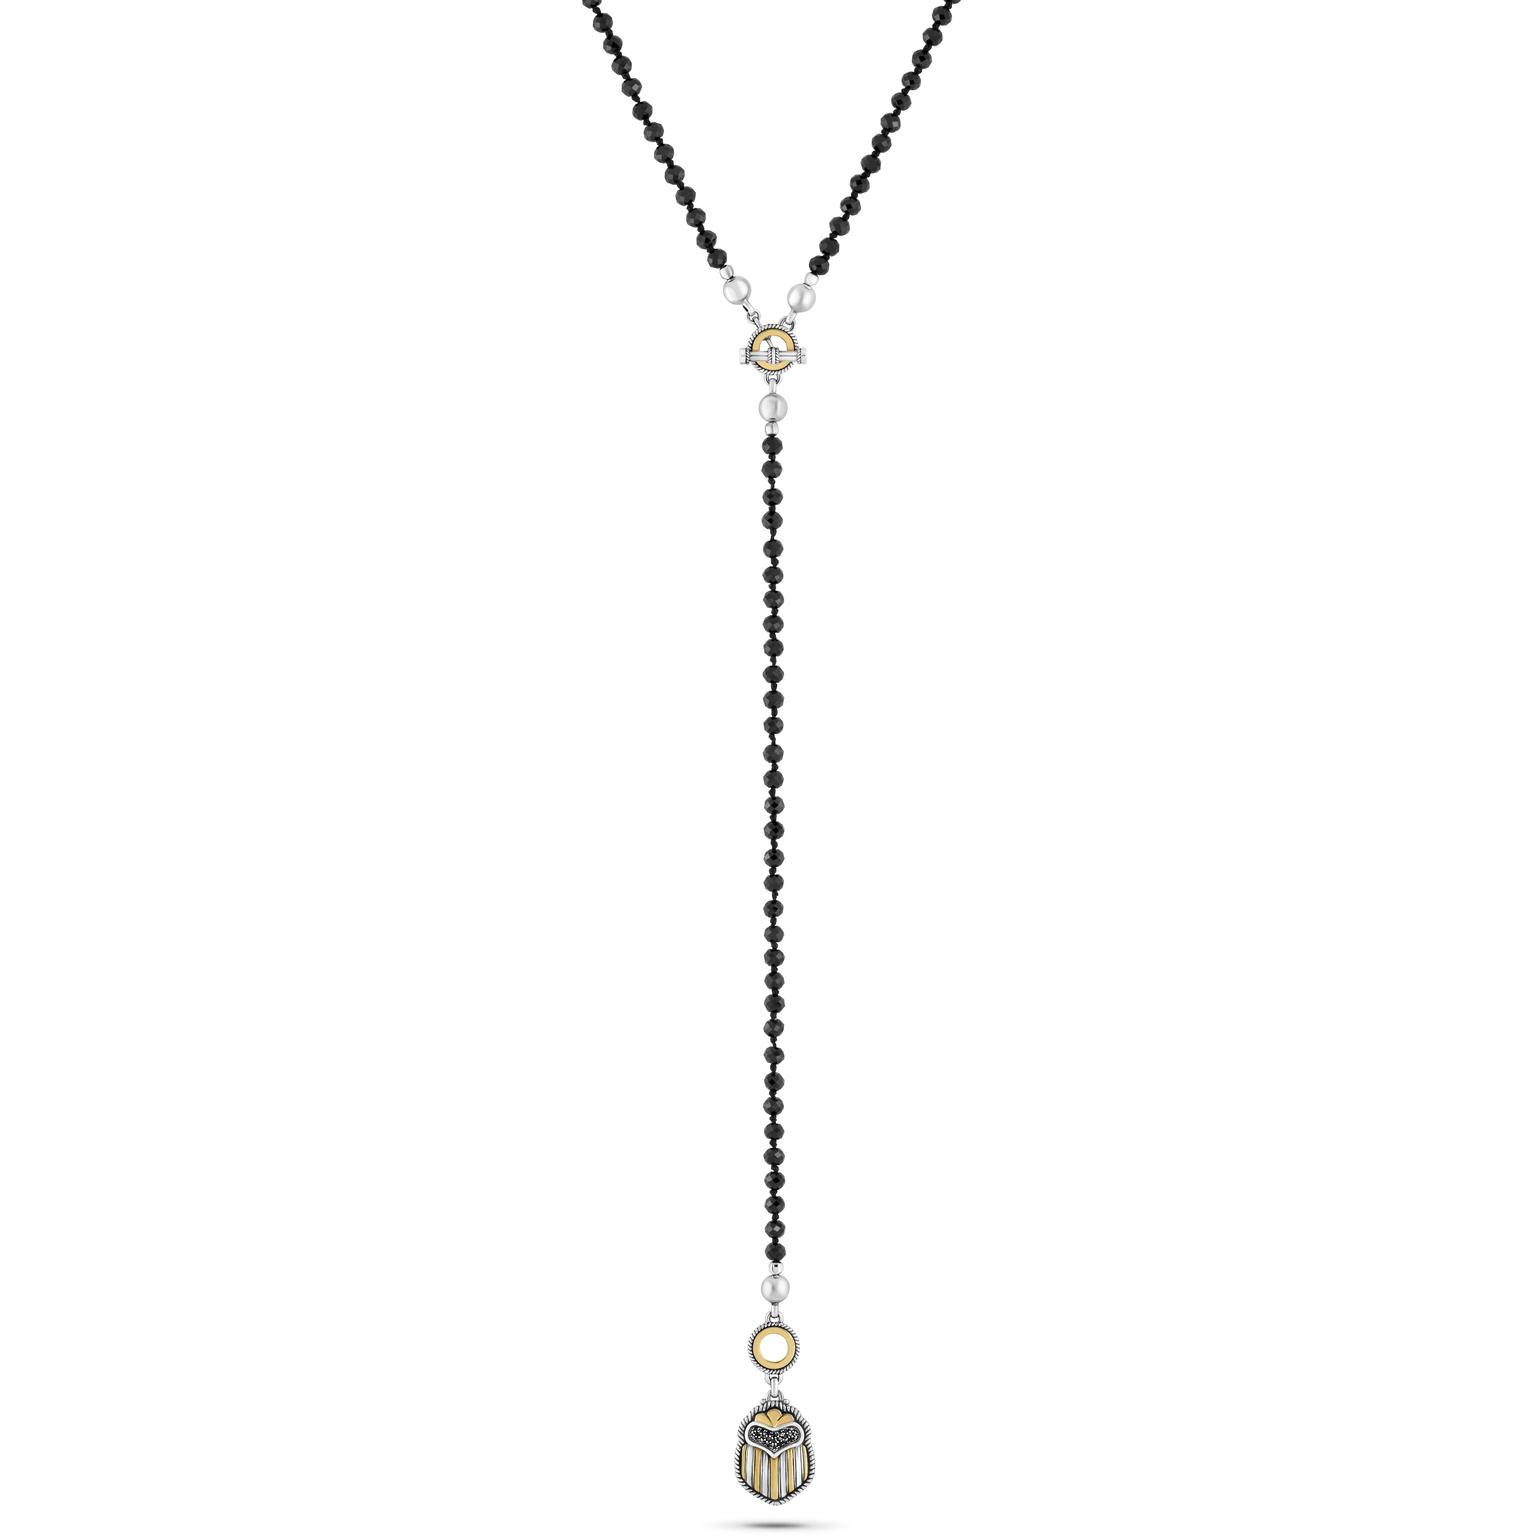 18kt Gold and sterling silver beaded multi-way scarab necklace adorned with semi-precious and precious stones (2)